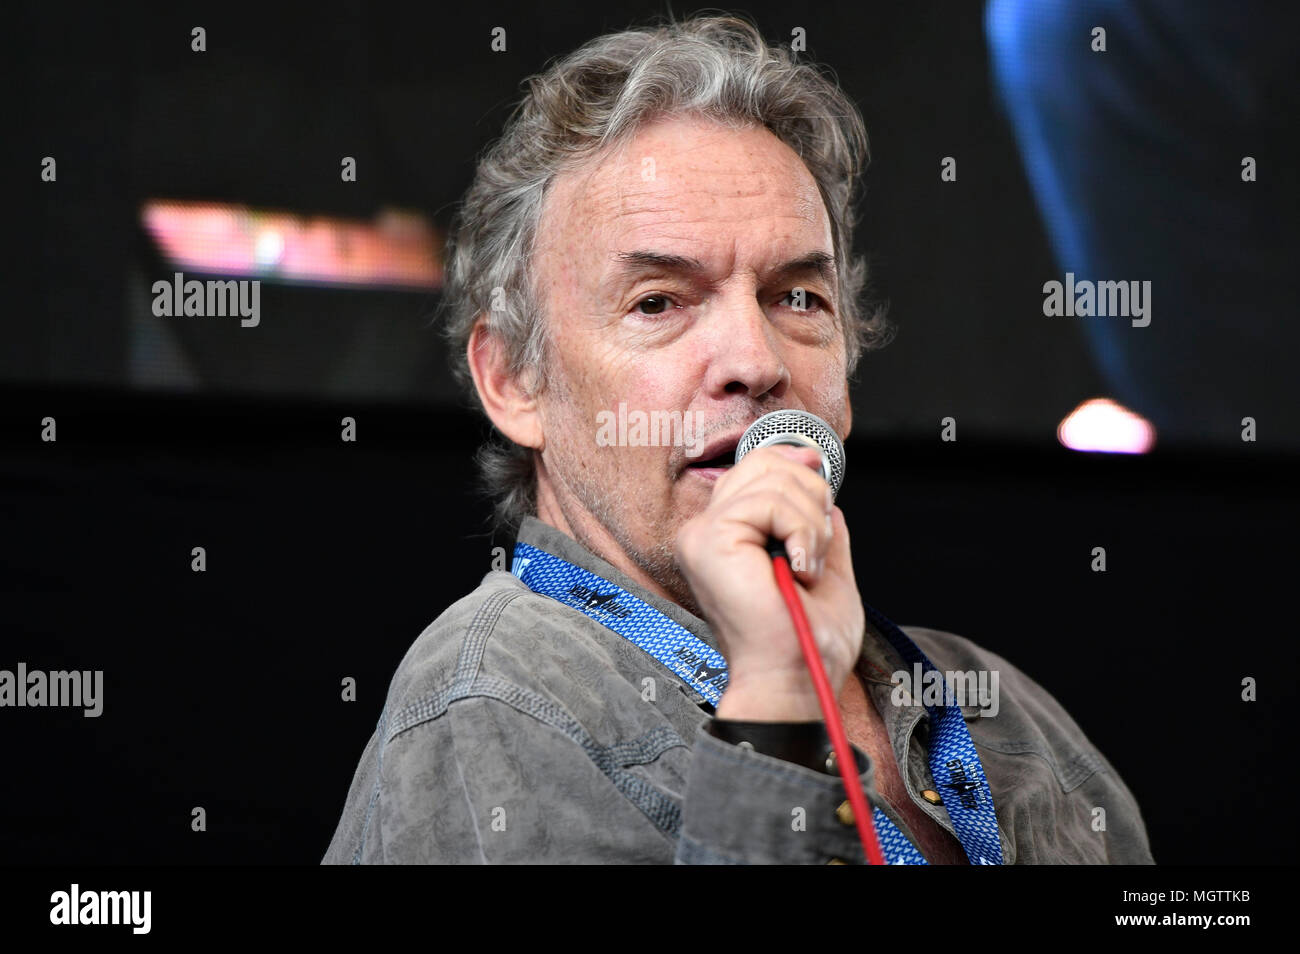 Dortmund, Germany. 27th Apr, 2018. Gary Graham at the Destination Star Trek Germany Convention in the Westfalenhalle. Dortmund, 27.04.2018 | usage worldwide Credit: dpa picture alliance/Alamy Live News Stock Photo